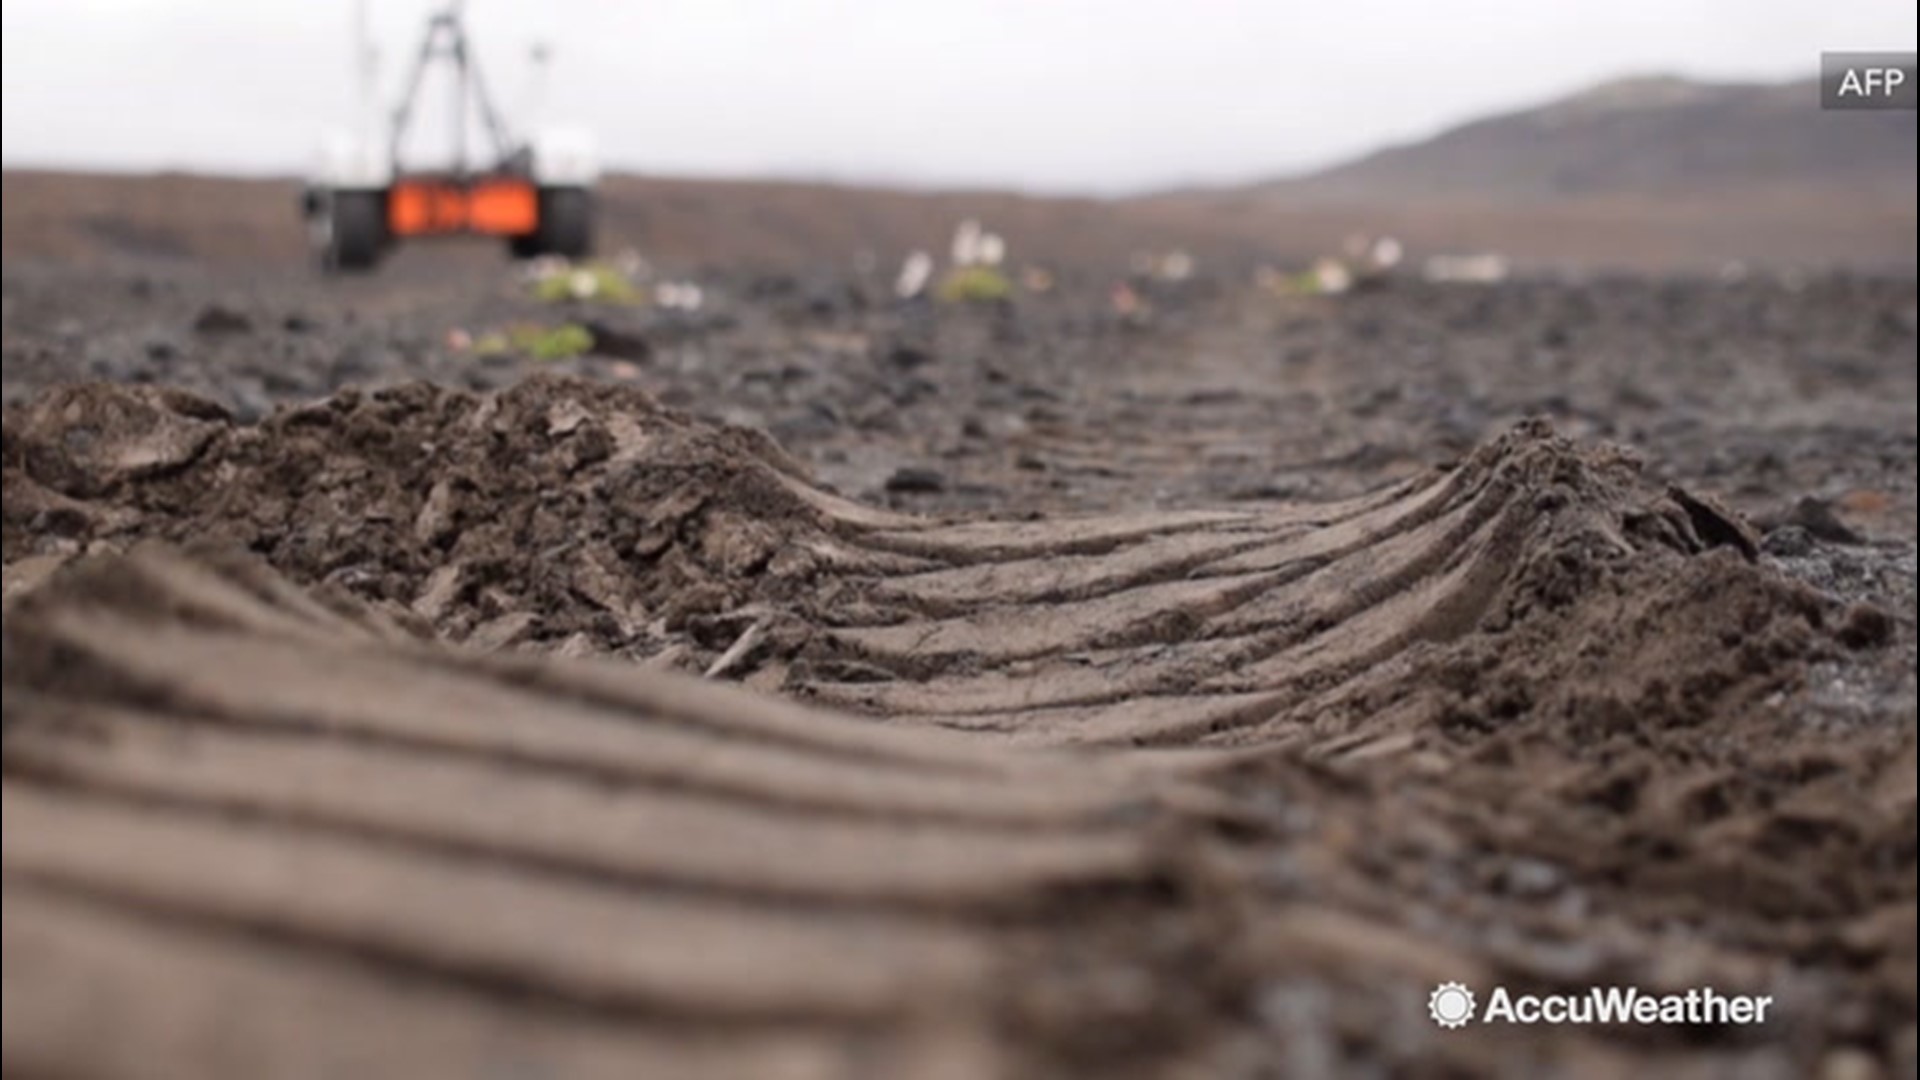 To get its new space explorer ready for a 2020 mission to Mars, NASA visited the Lambahraun lava field in Iceland, in July, testing out the new space equipment among the areas black sand and rugged terrain.